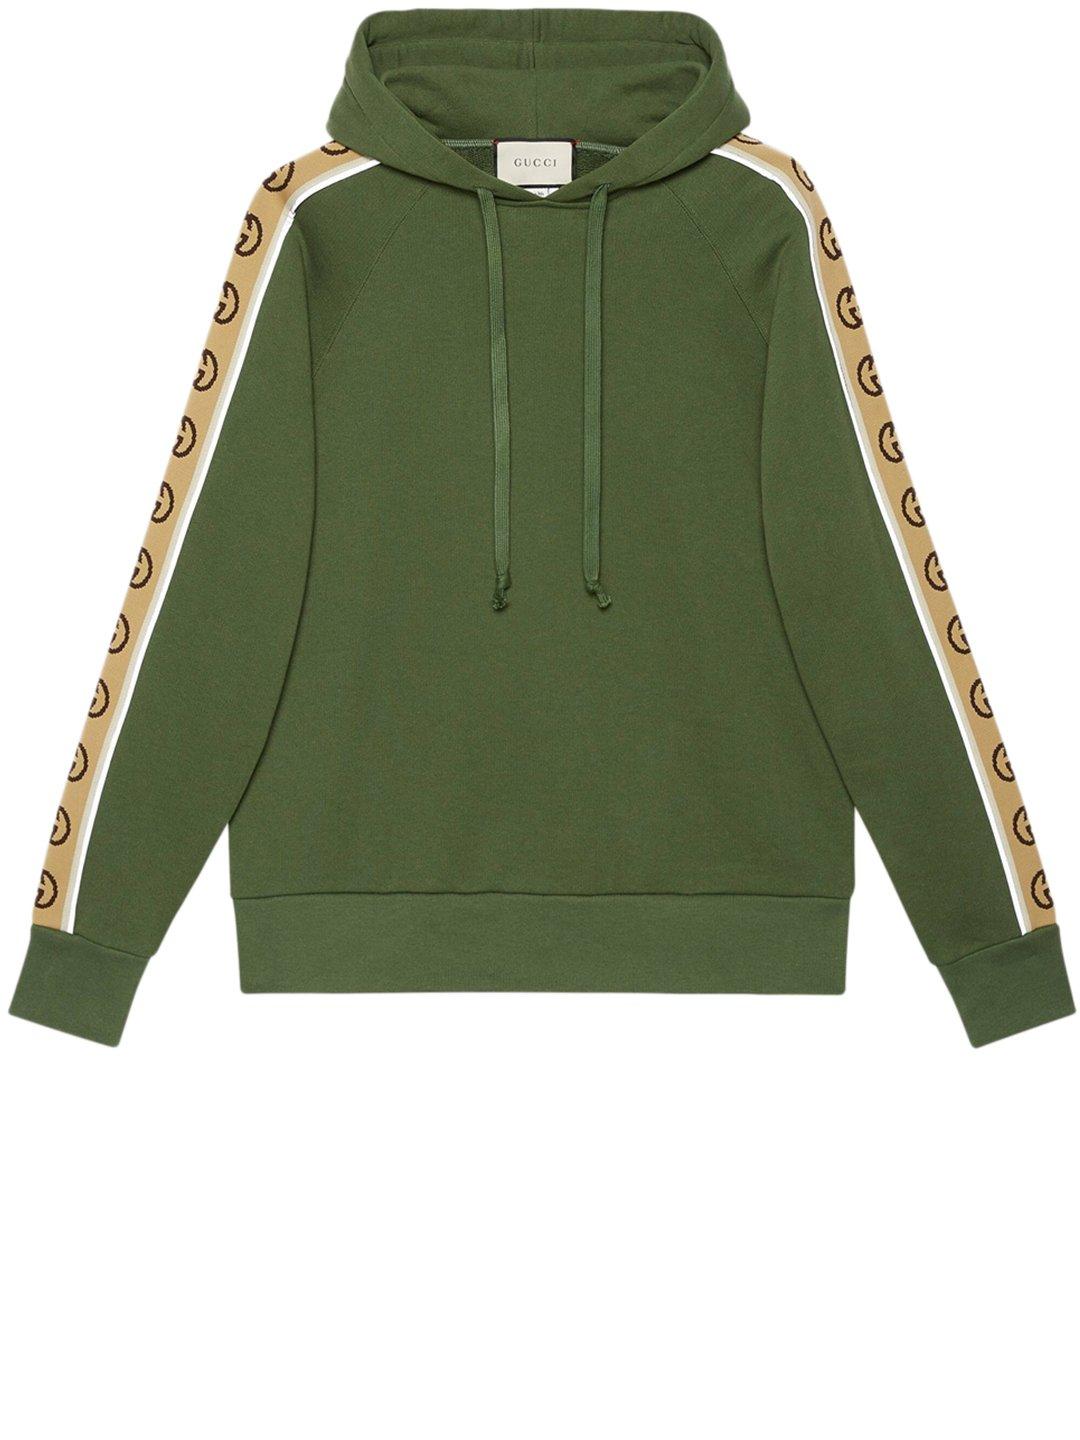 Gucci Cotton Jersey Hooded Sweatshirt in Green for Men | Lyst Canada